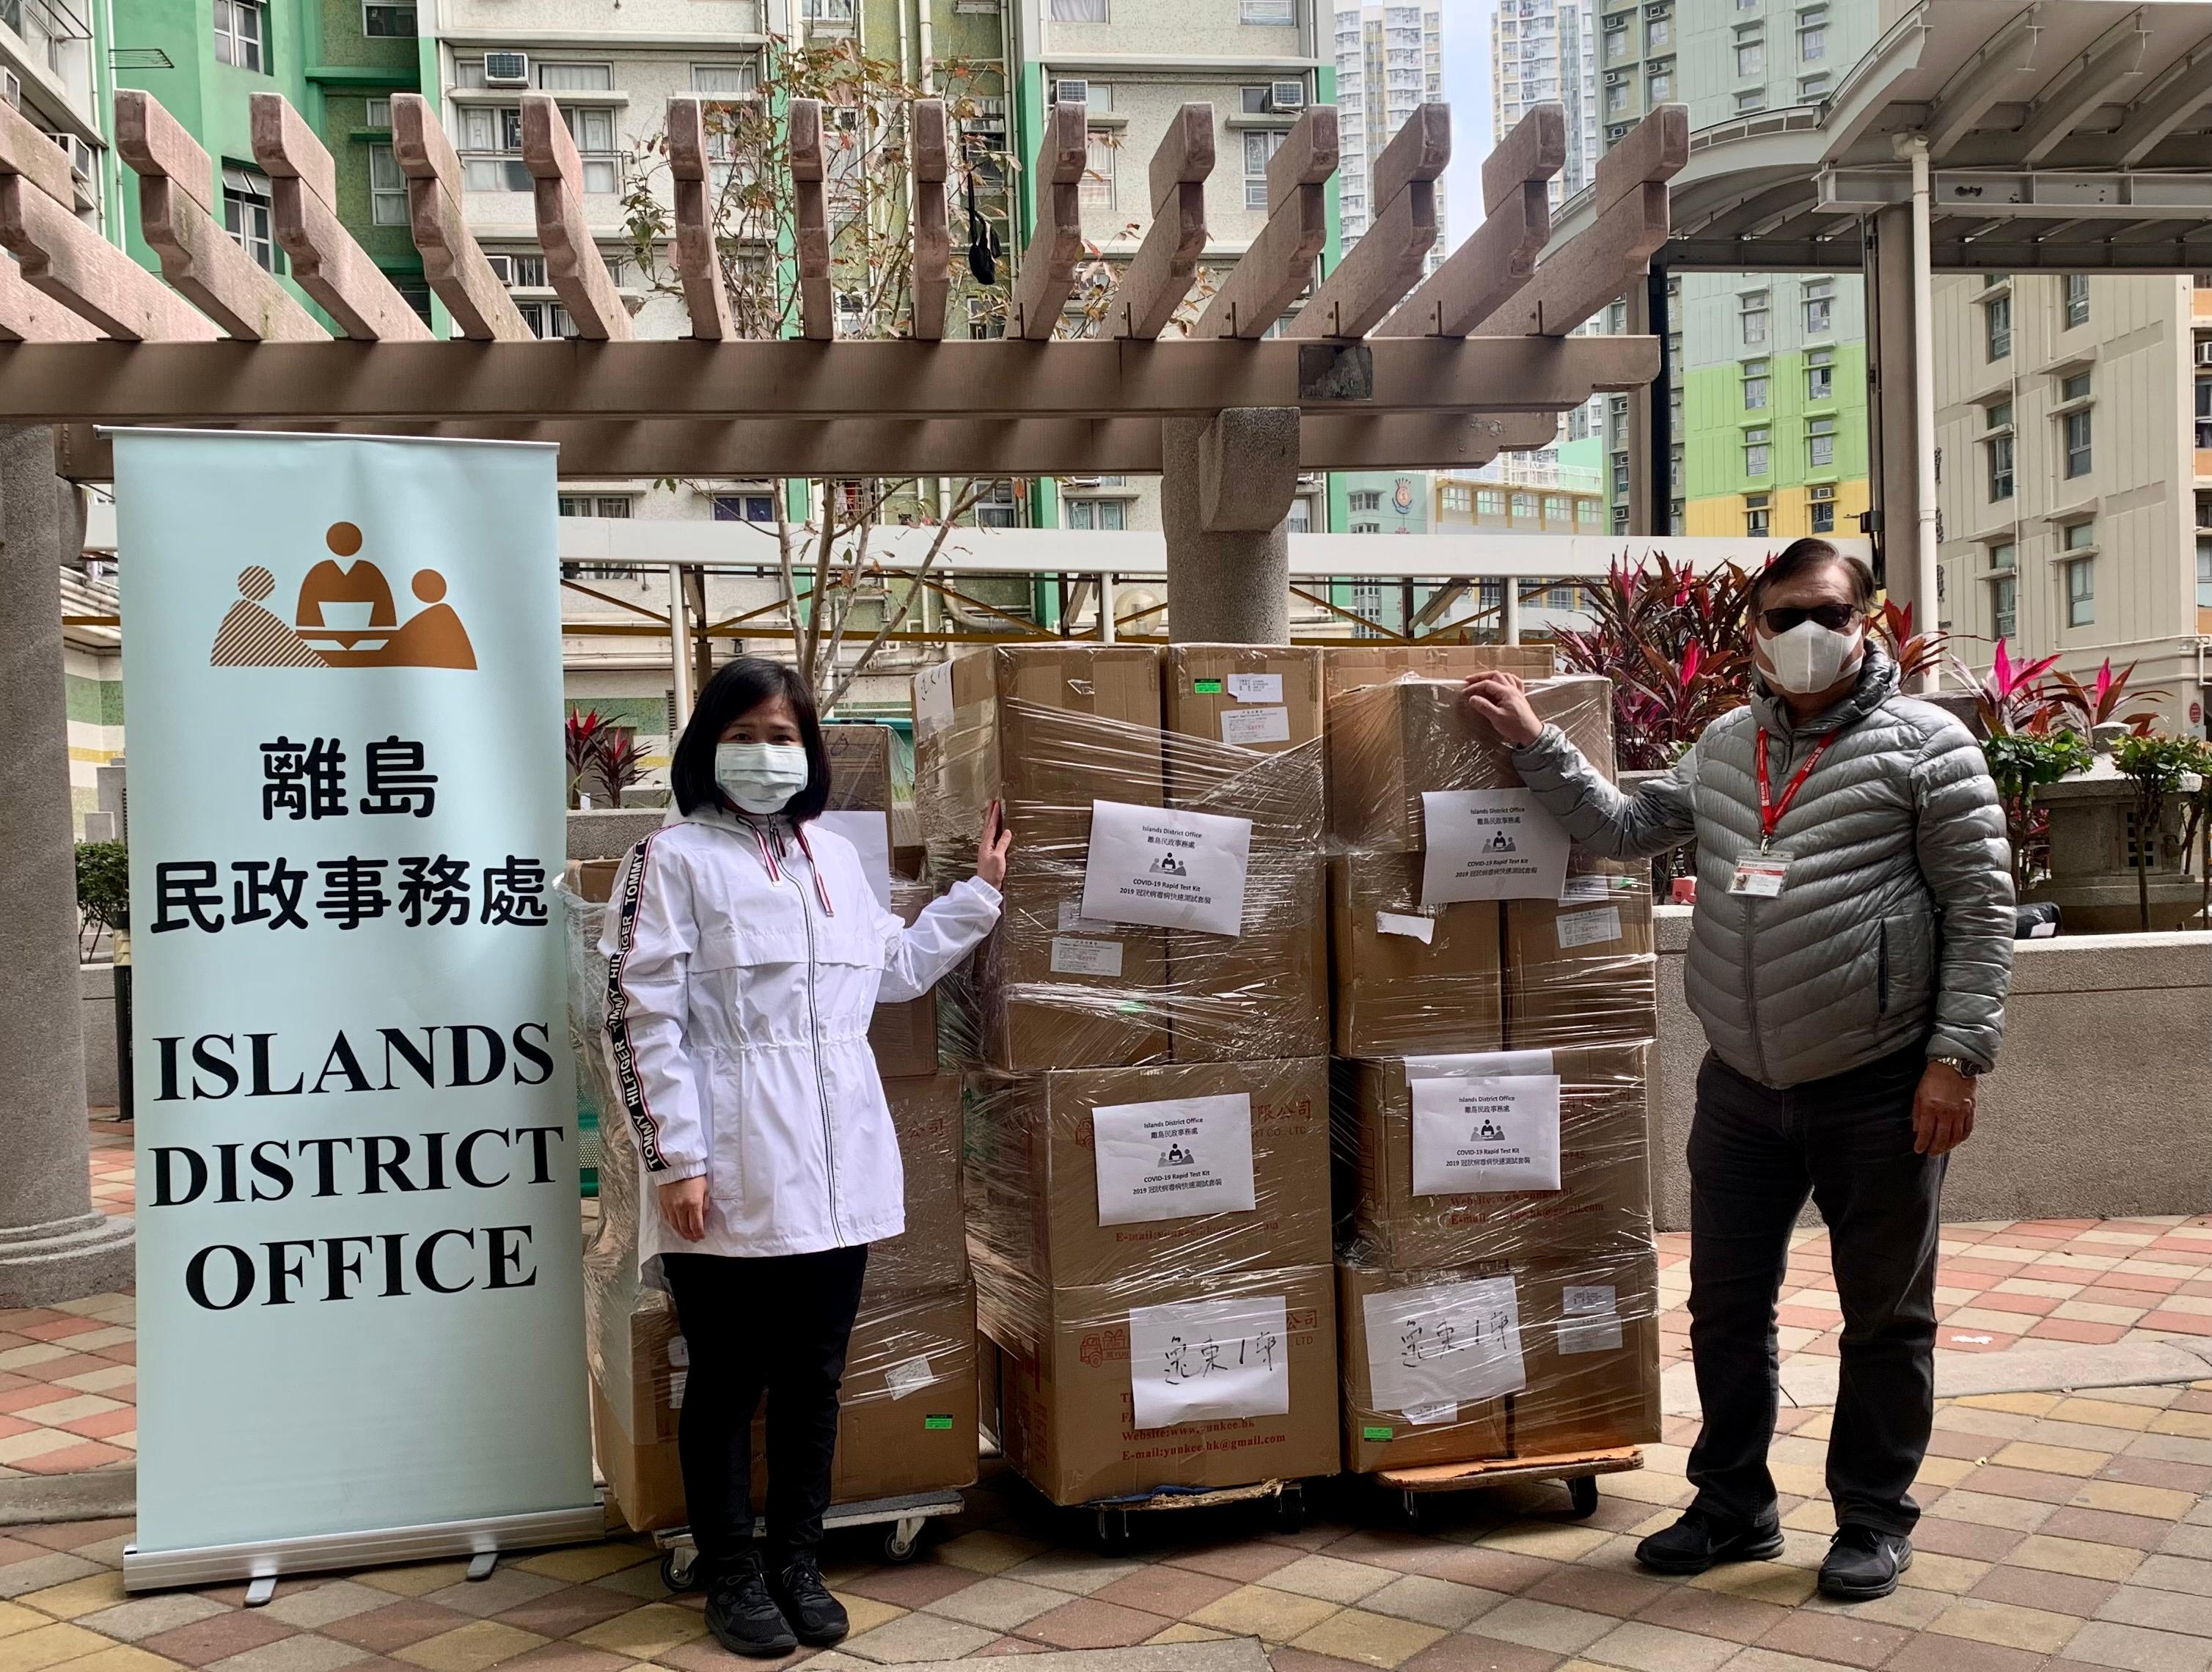 The Islands District Office today (February 24) distributed COVID-19 rapid test kits to households, cleansing workers and property management staff living and working in Yu Yat House for voluntary testing through the property management company of Yat Tung (I) Estate